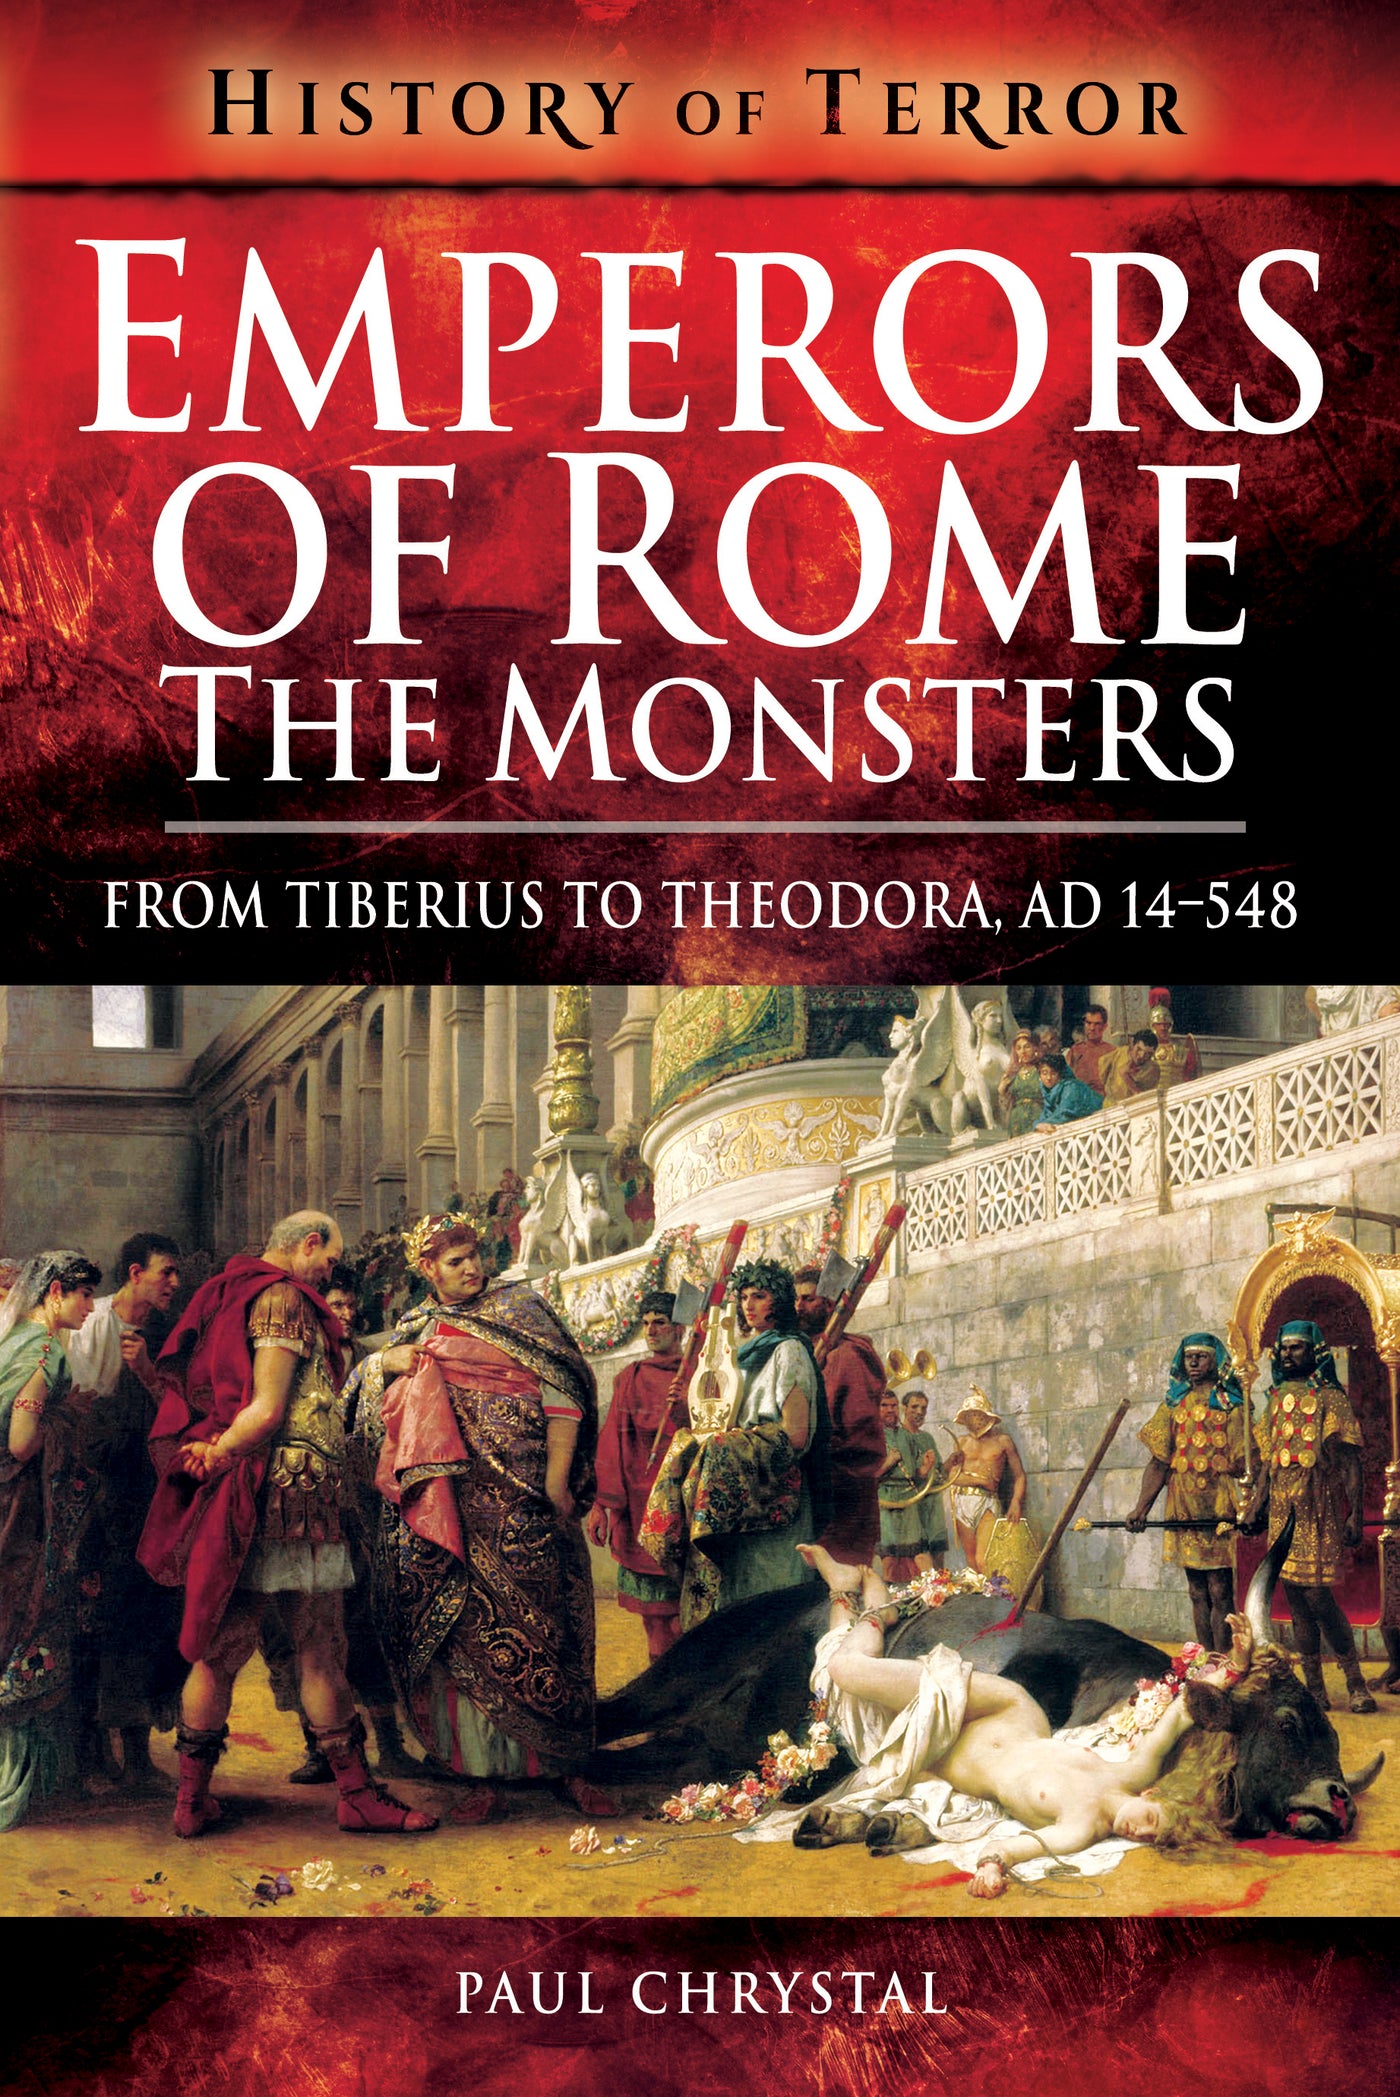 Emperors of Rome: The Monsters